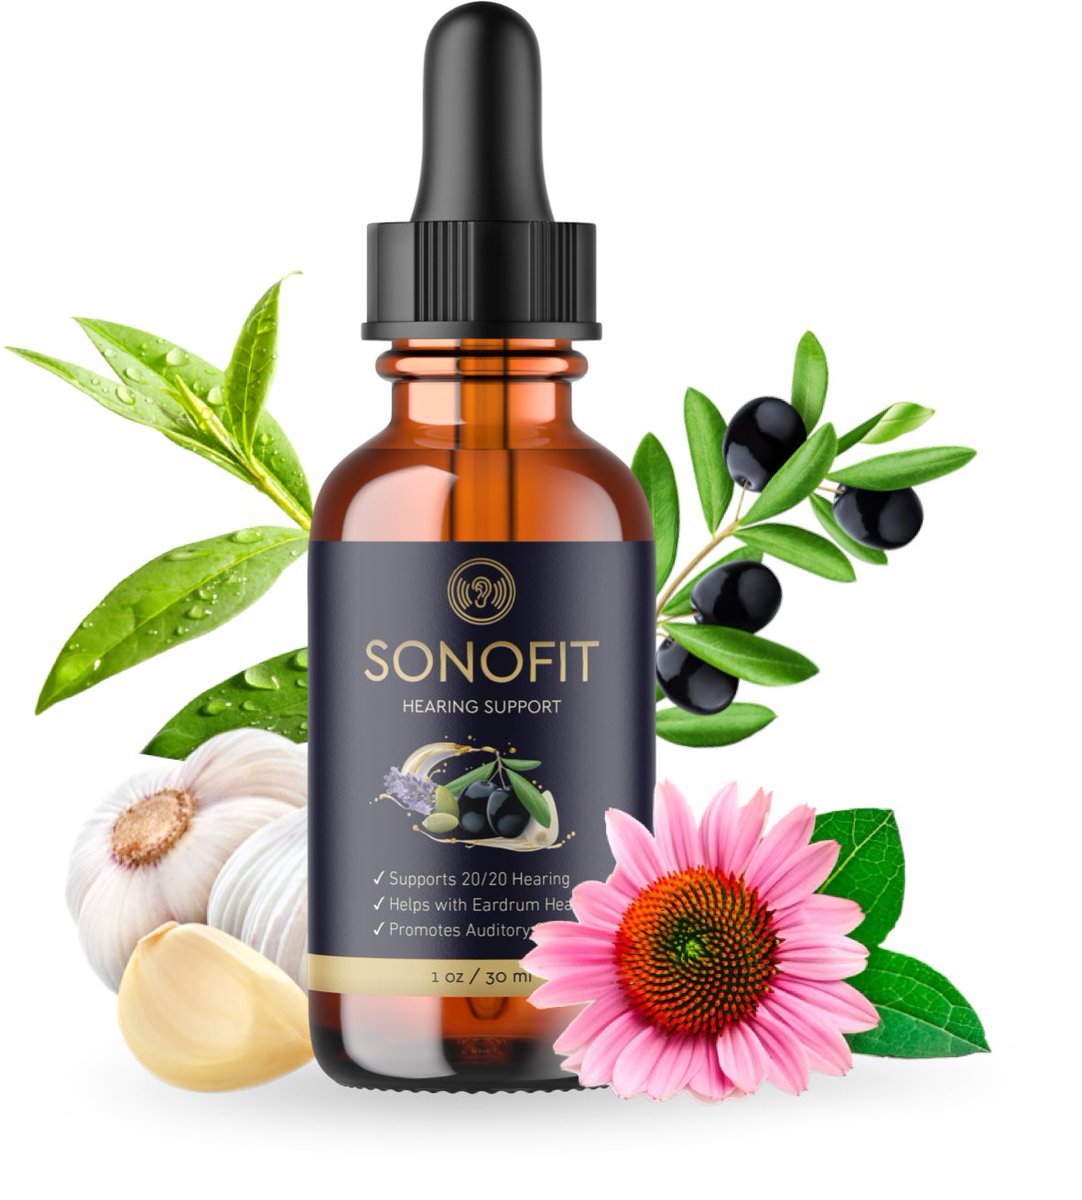 Protecting ear cells from loud noises with Sonafit
colourinyourlife.com.au/members/supple…
Sonafit is a revolutionary supplement designed to support and maintain optimal hearing health. Packed with essential nutrients and scientifically proven ingredients